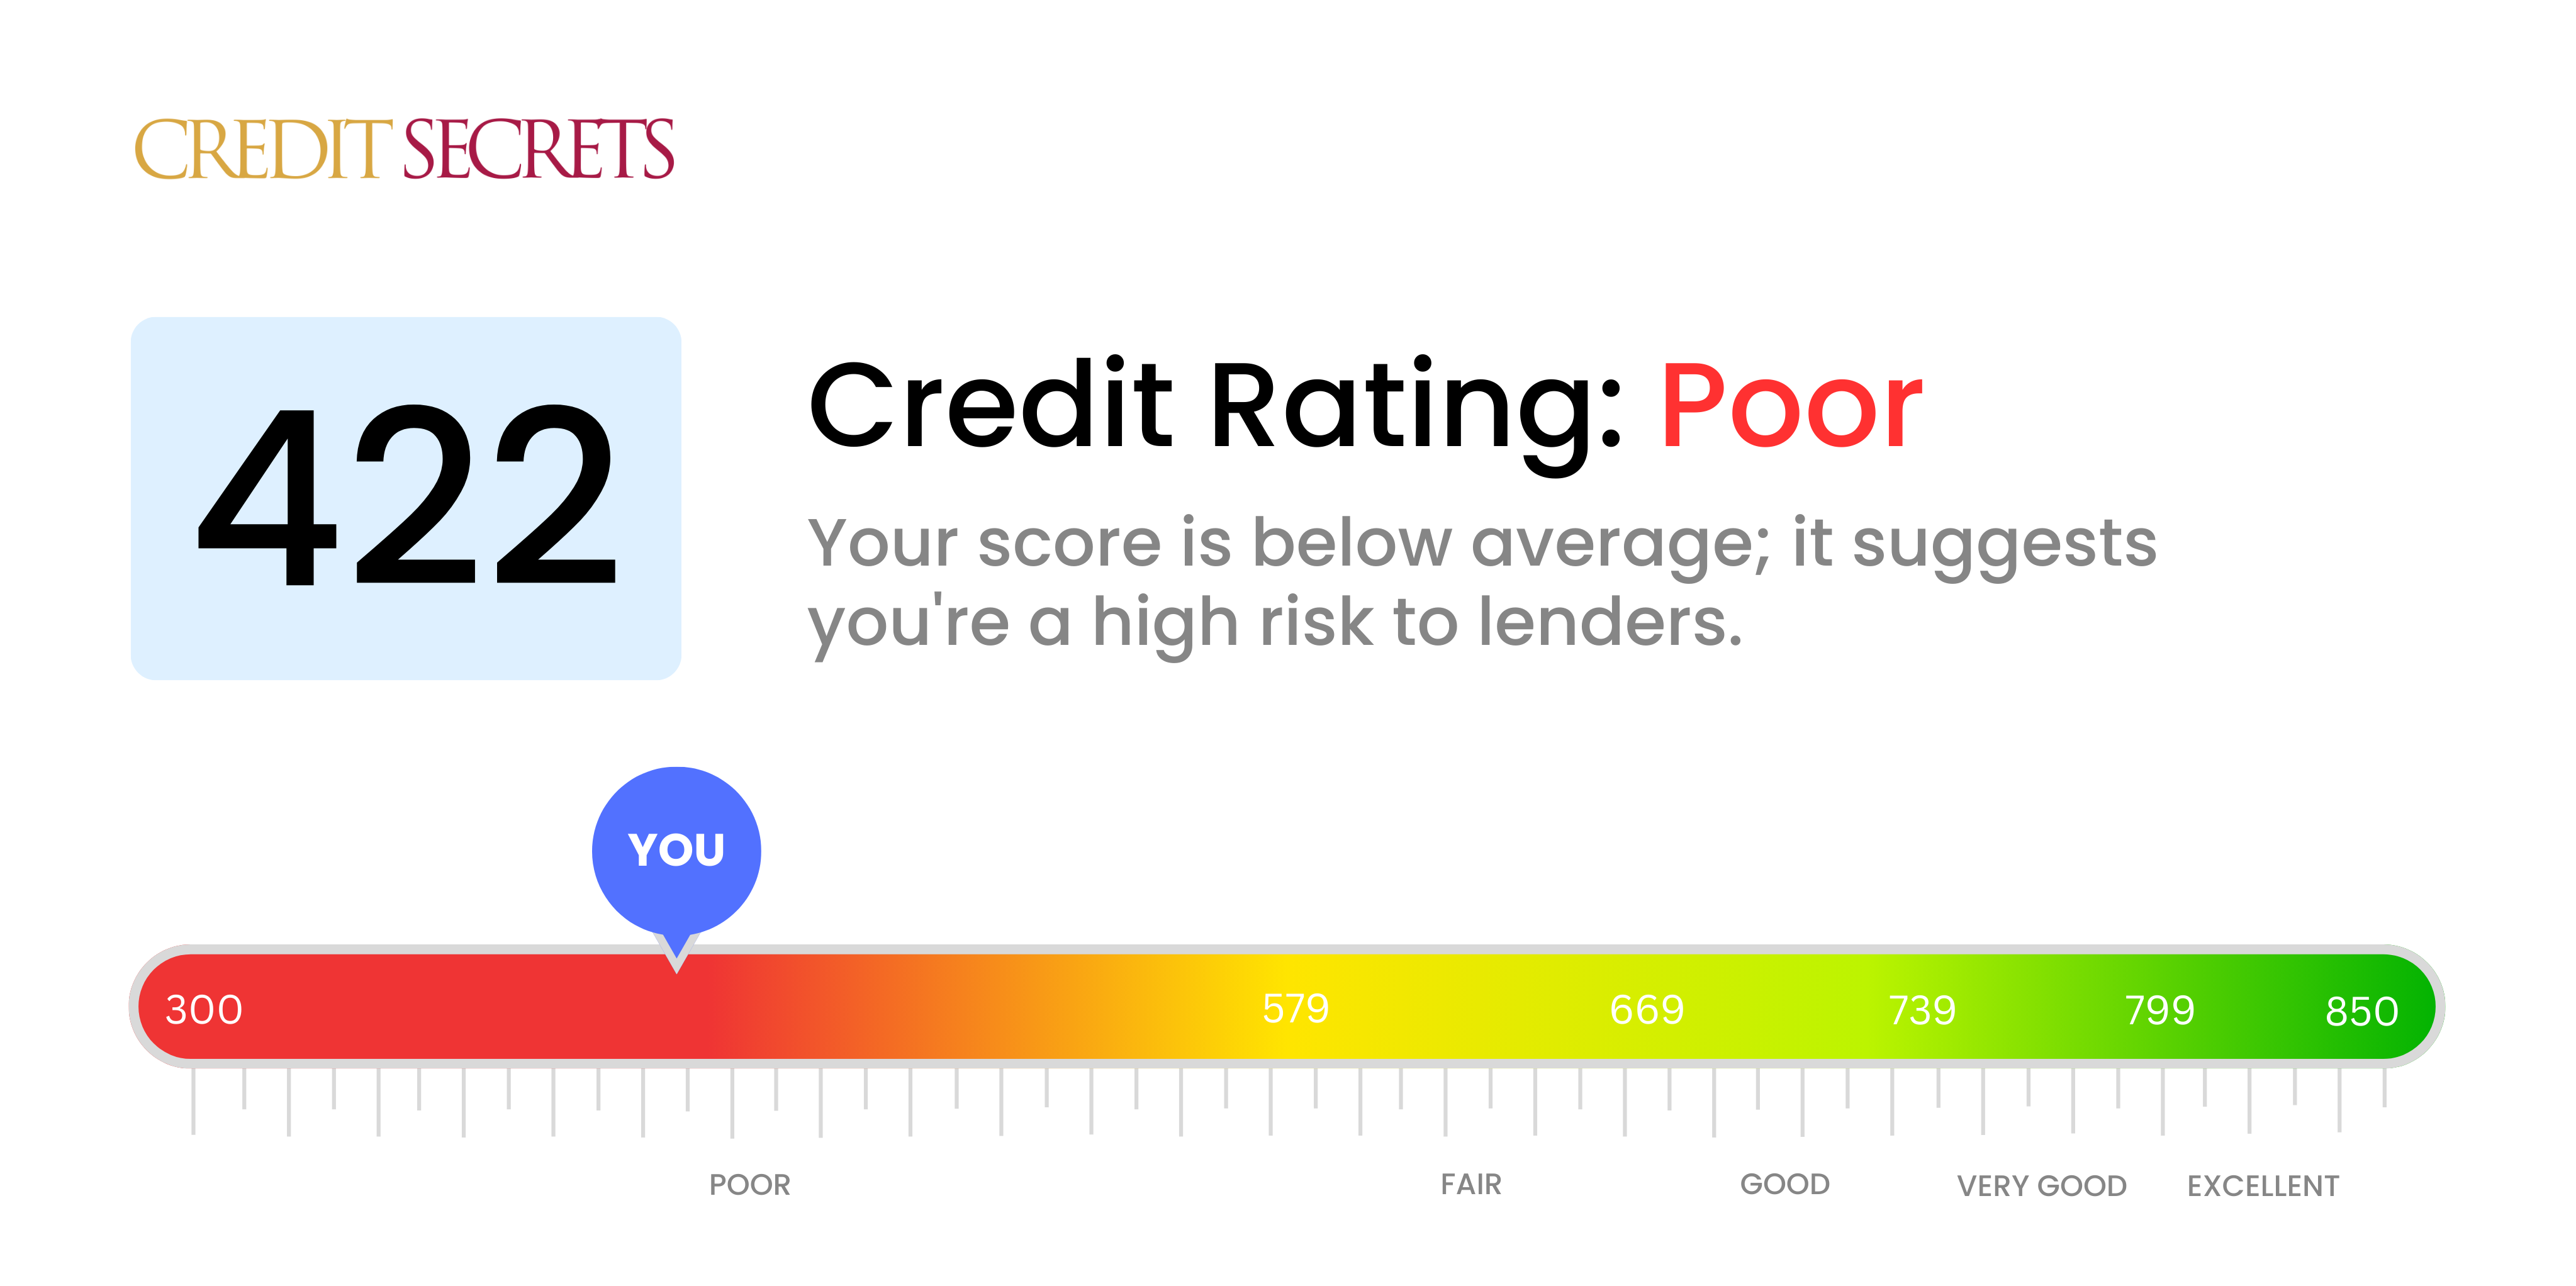 Is 422 a good credit score?